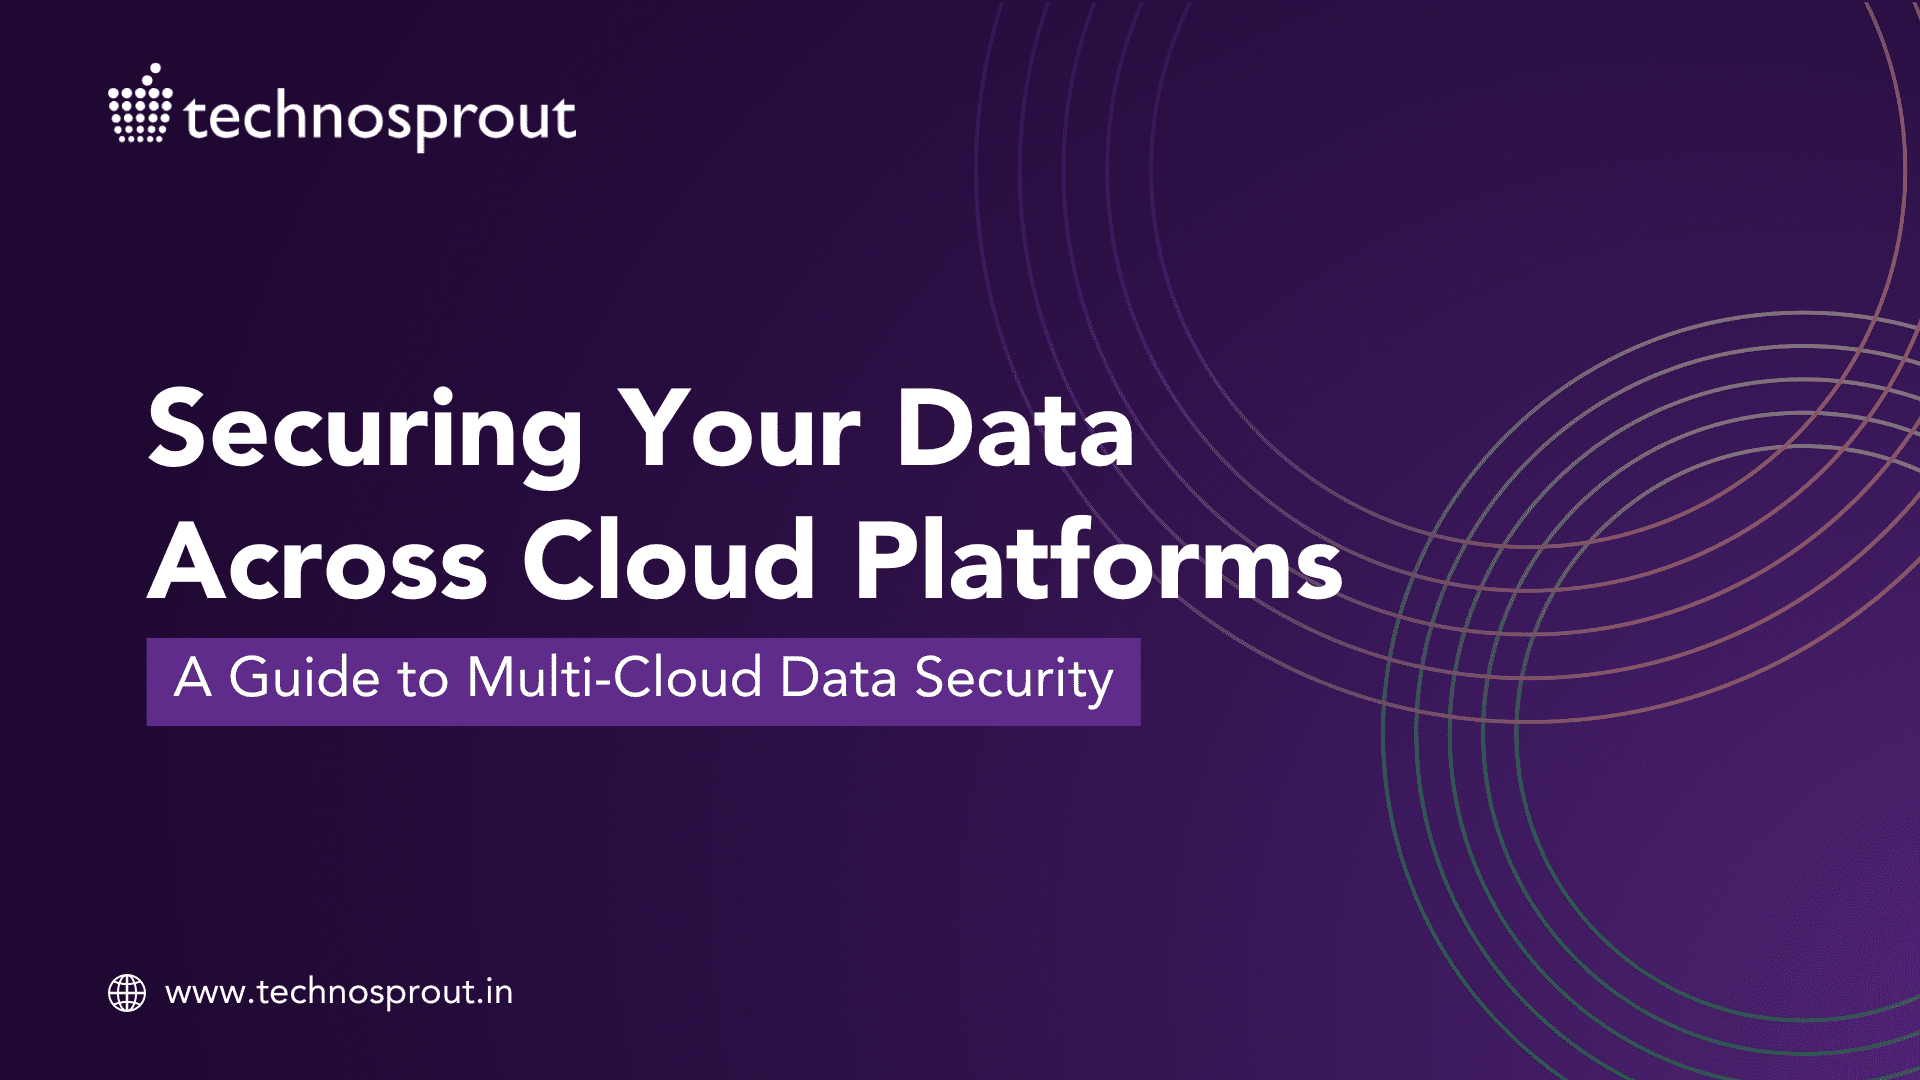 Securing Your Data Across Cloud Platforms: A guide to Multi-Cloud Data Security